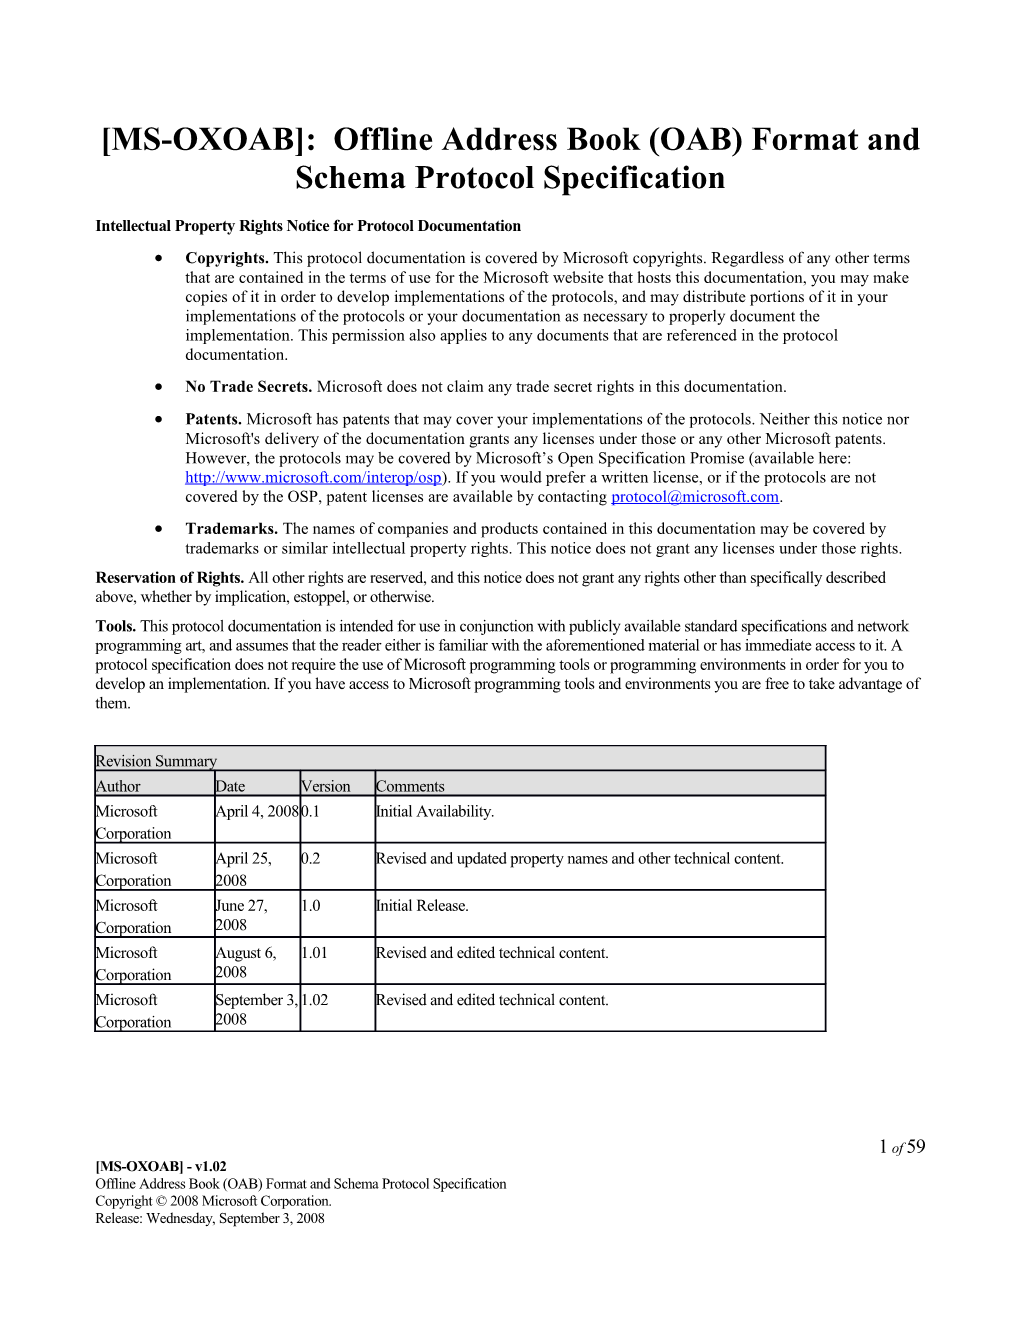 MS-OXOAB : Offline Address Book (OAB) Format and Schema Protocol Specification